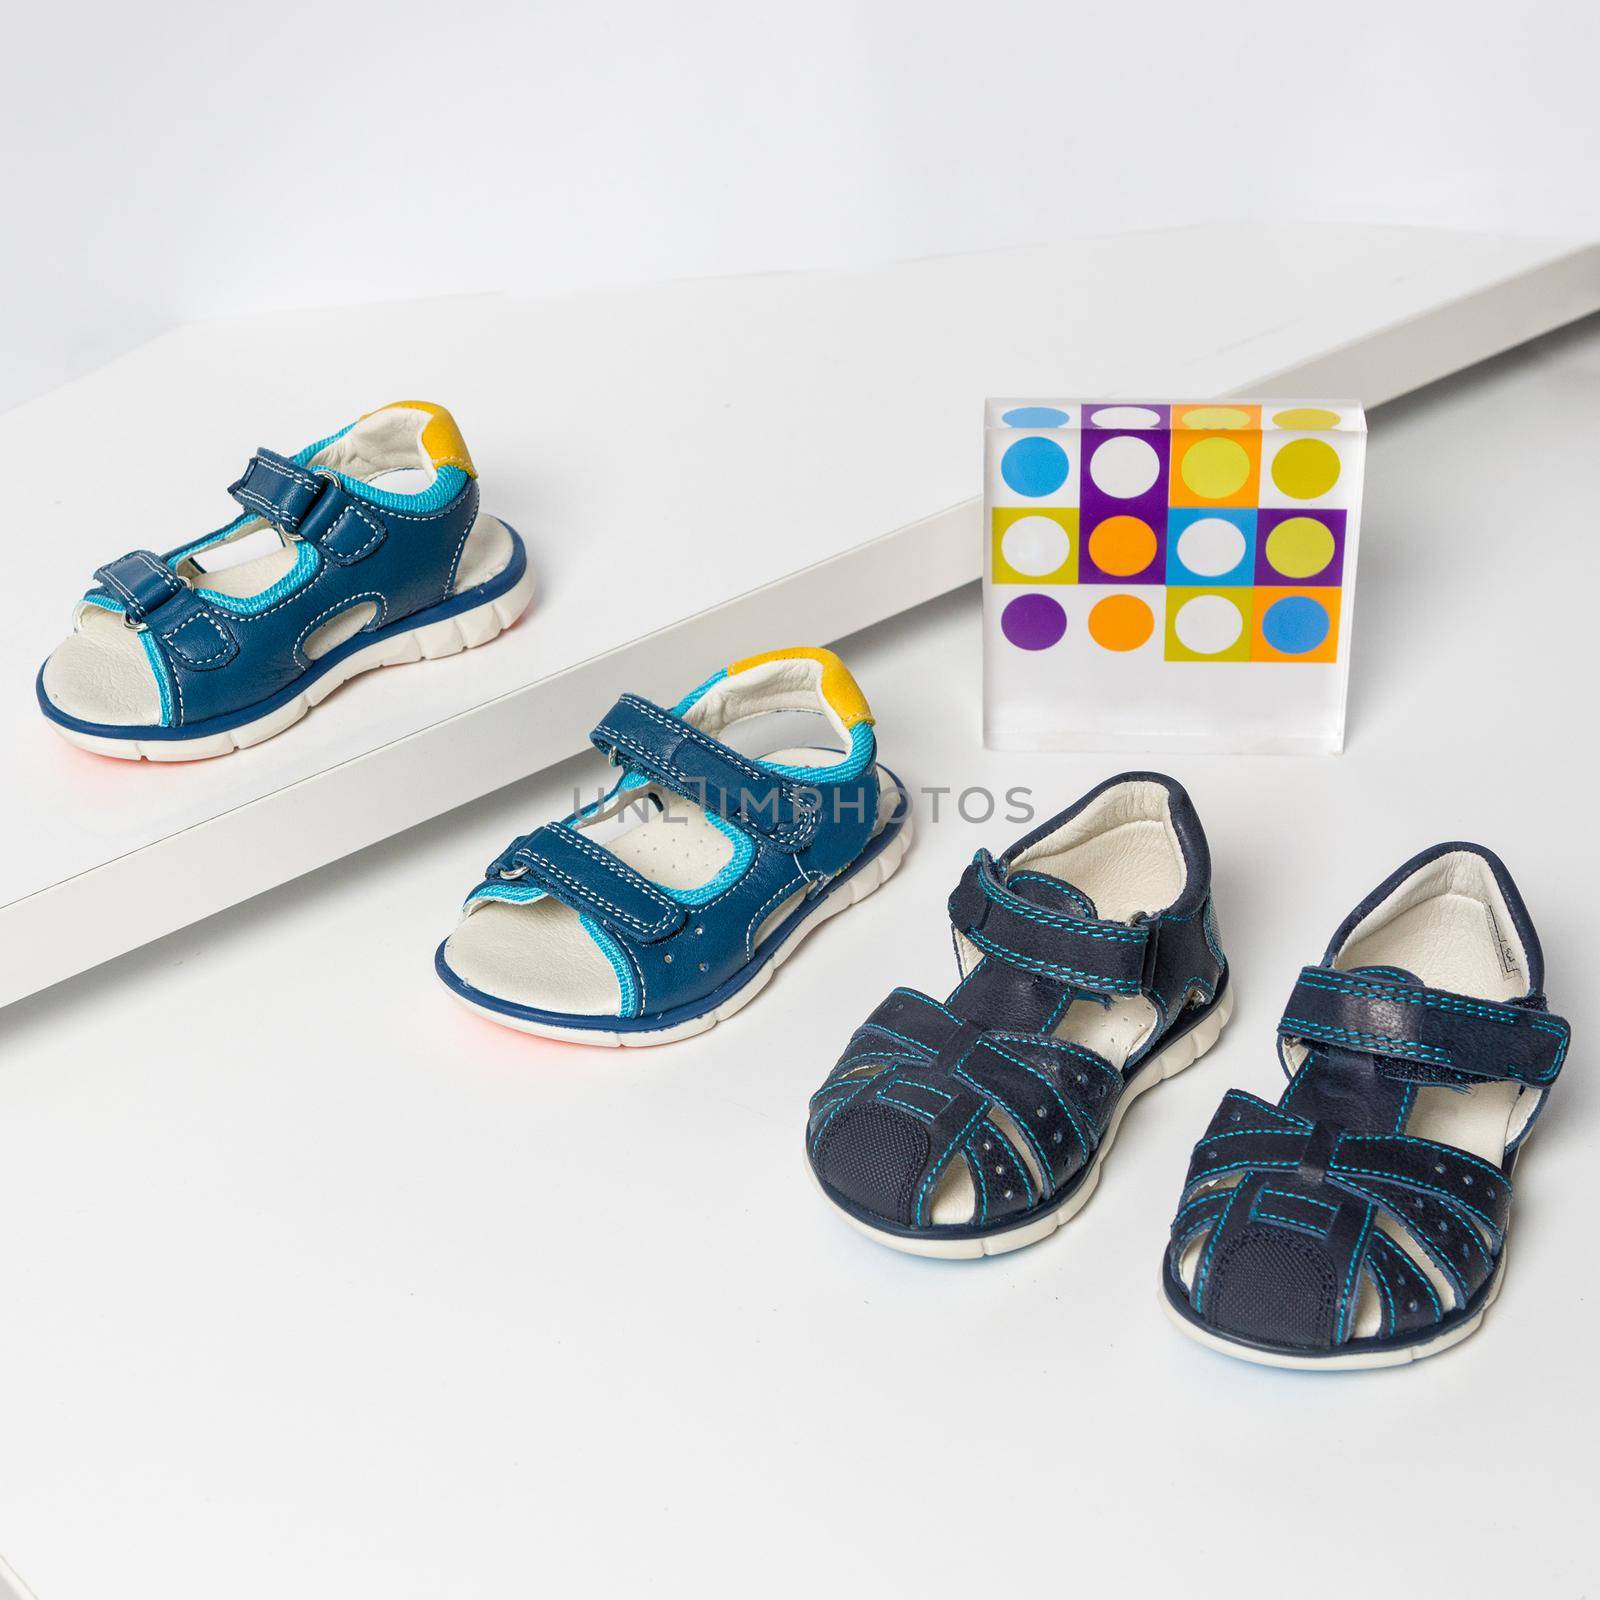 Blue kids sandals on a white background